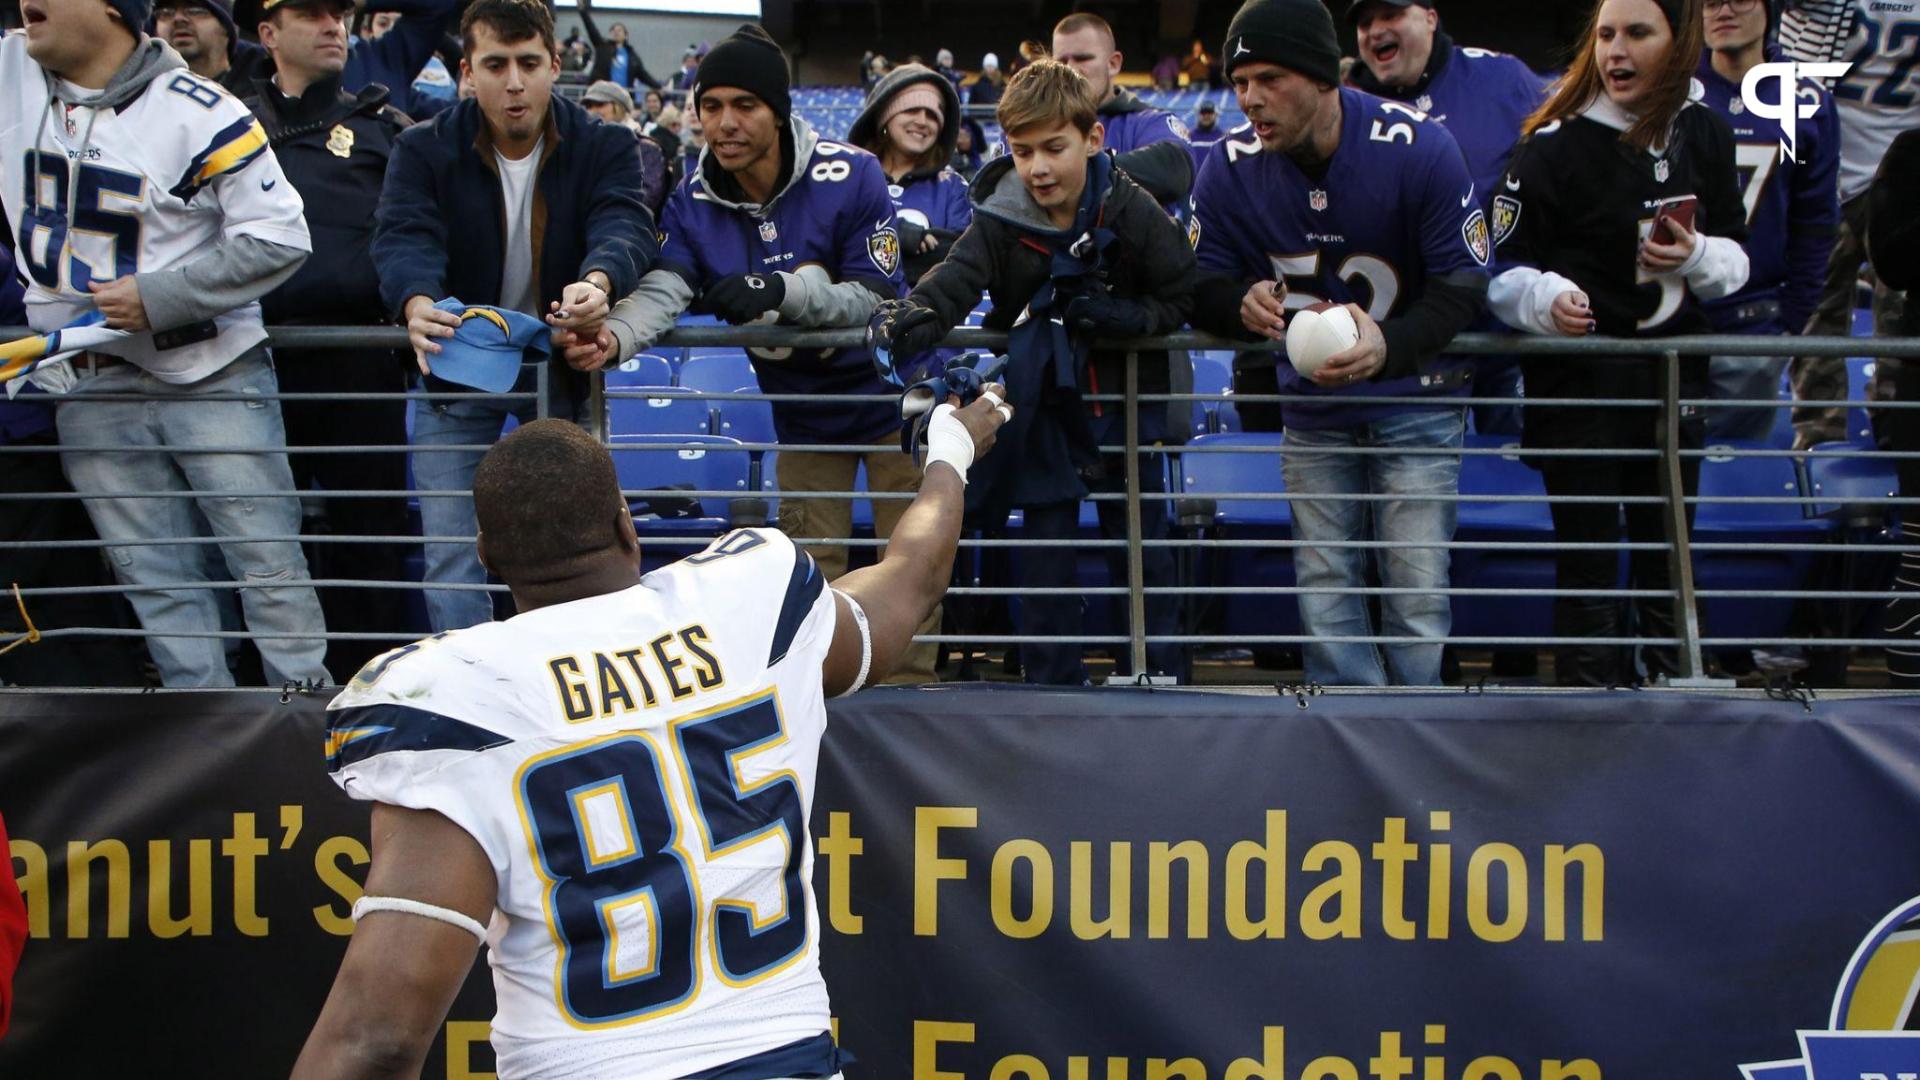 Los Angeles Chargers tight end Antonio Gates (85) hands his gloves to a fan in the stands after the Chargers' game against the Baltimore Ravens in a AFC Wild Card playoff football game at M&T Bank Sta...